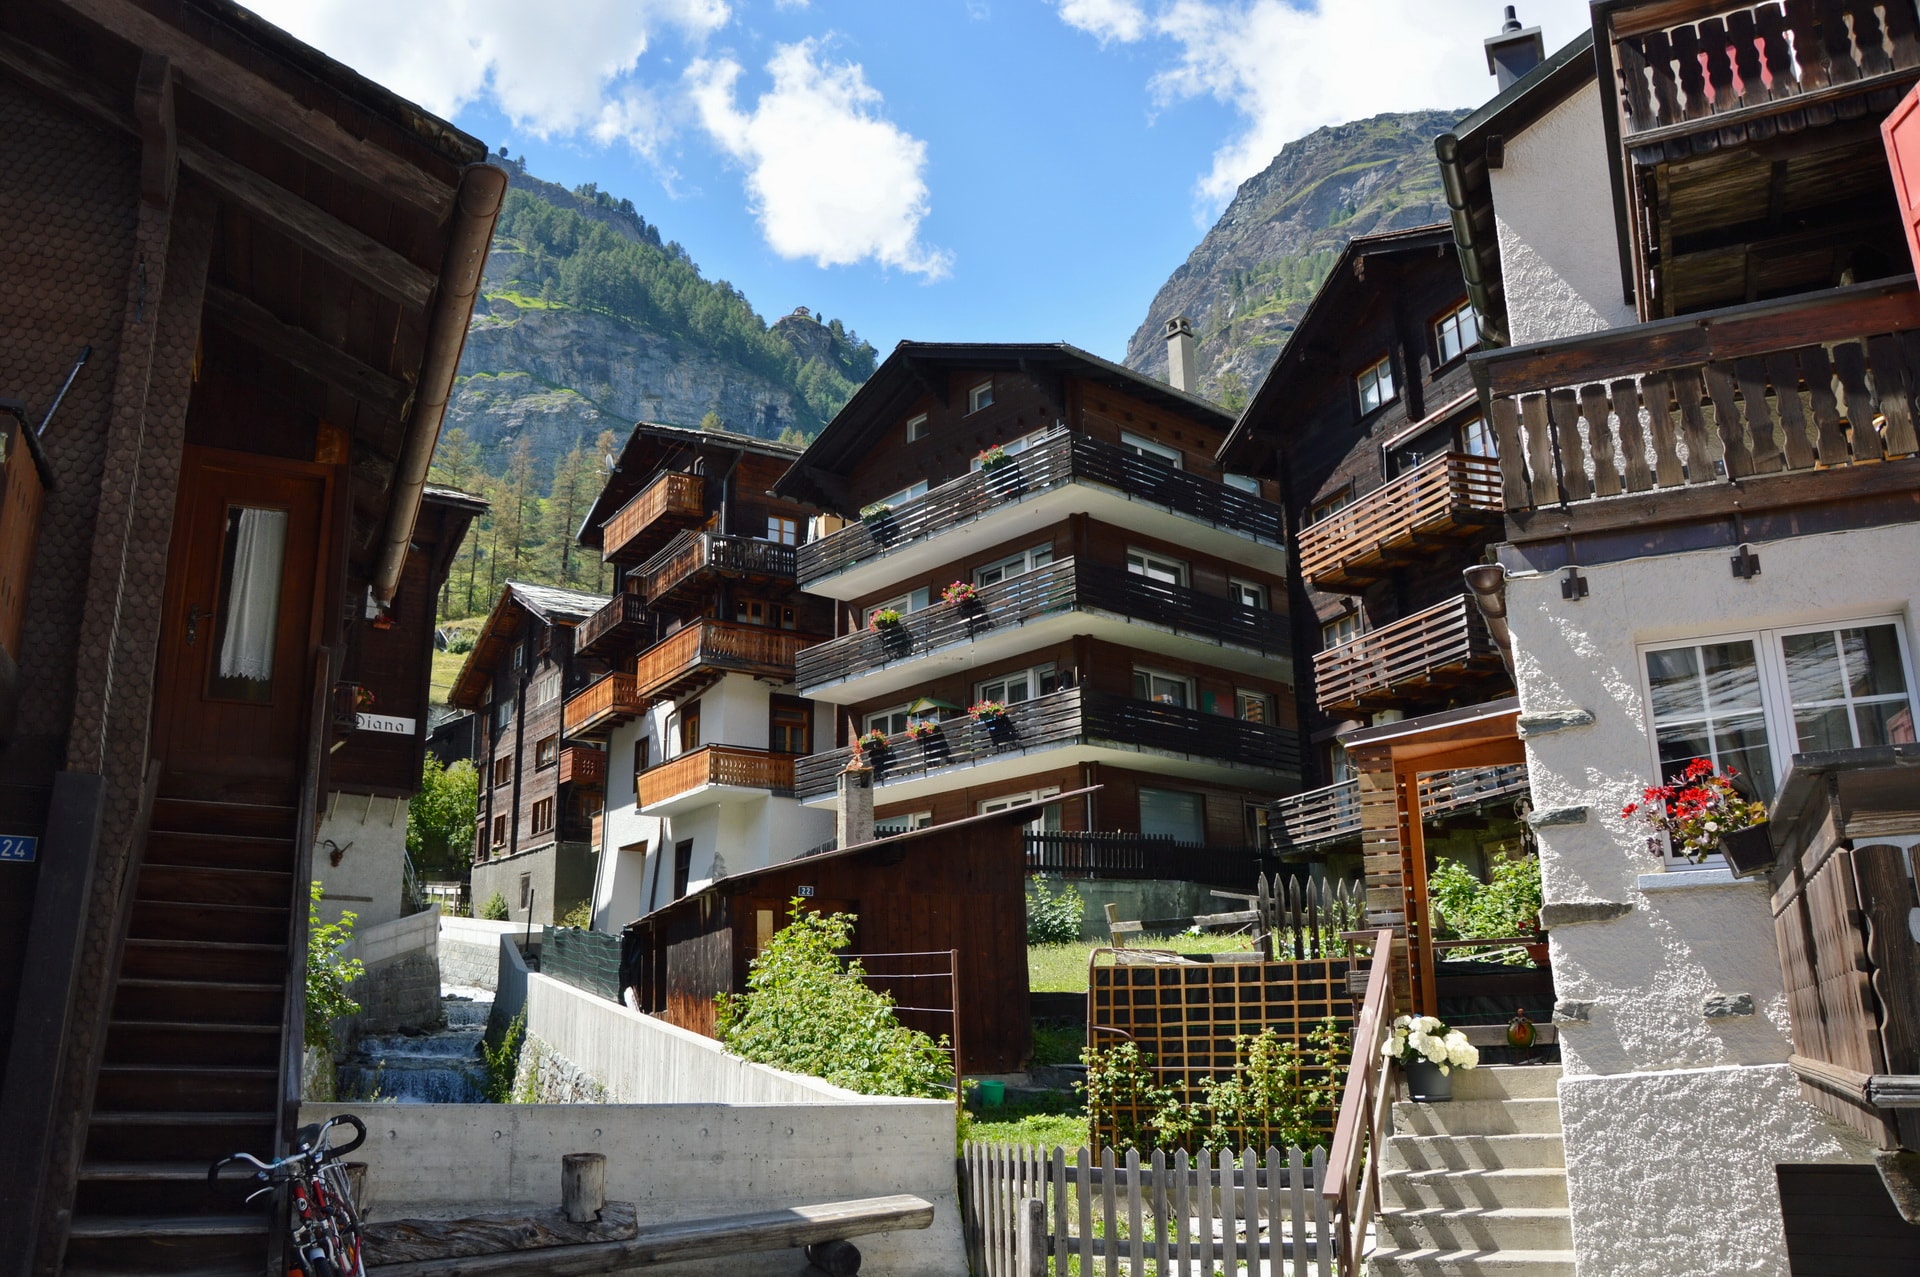 There are o lot of hotels and chalets for tourists in Zermatt